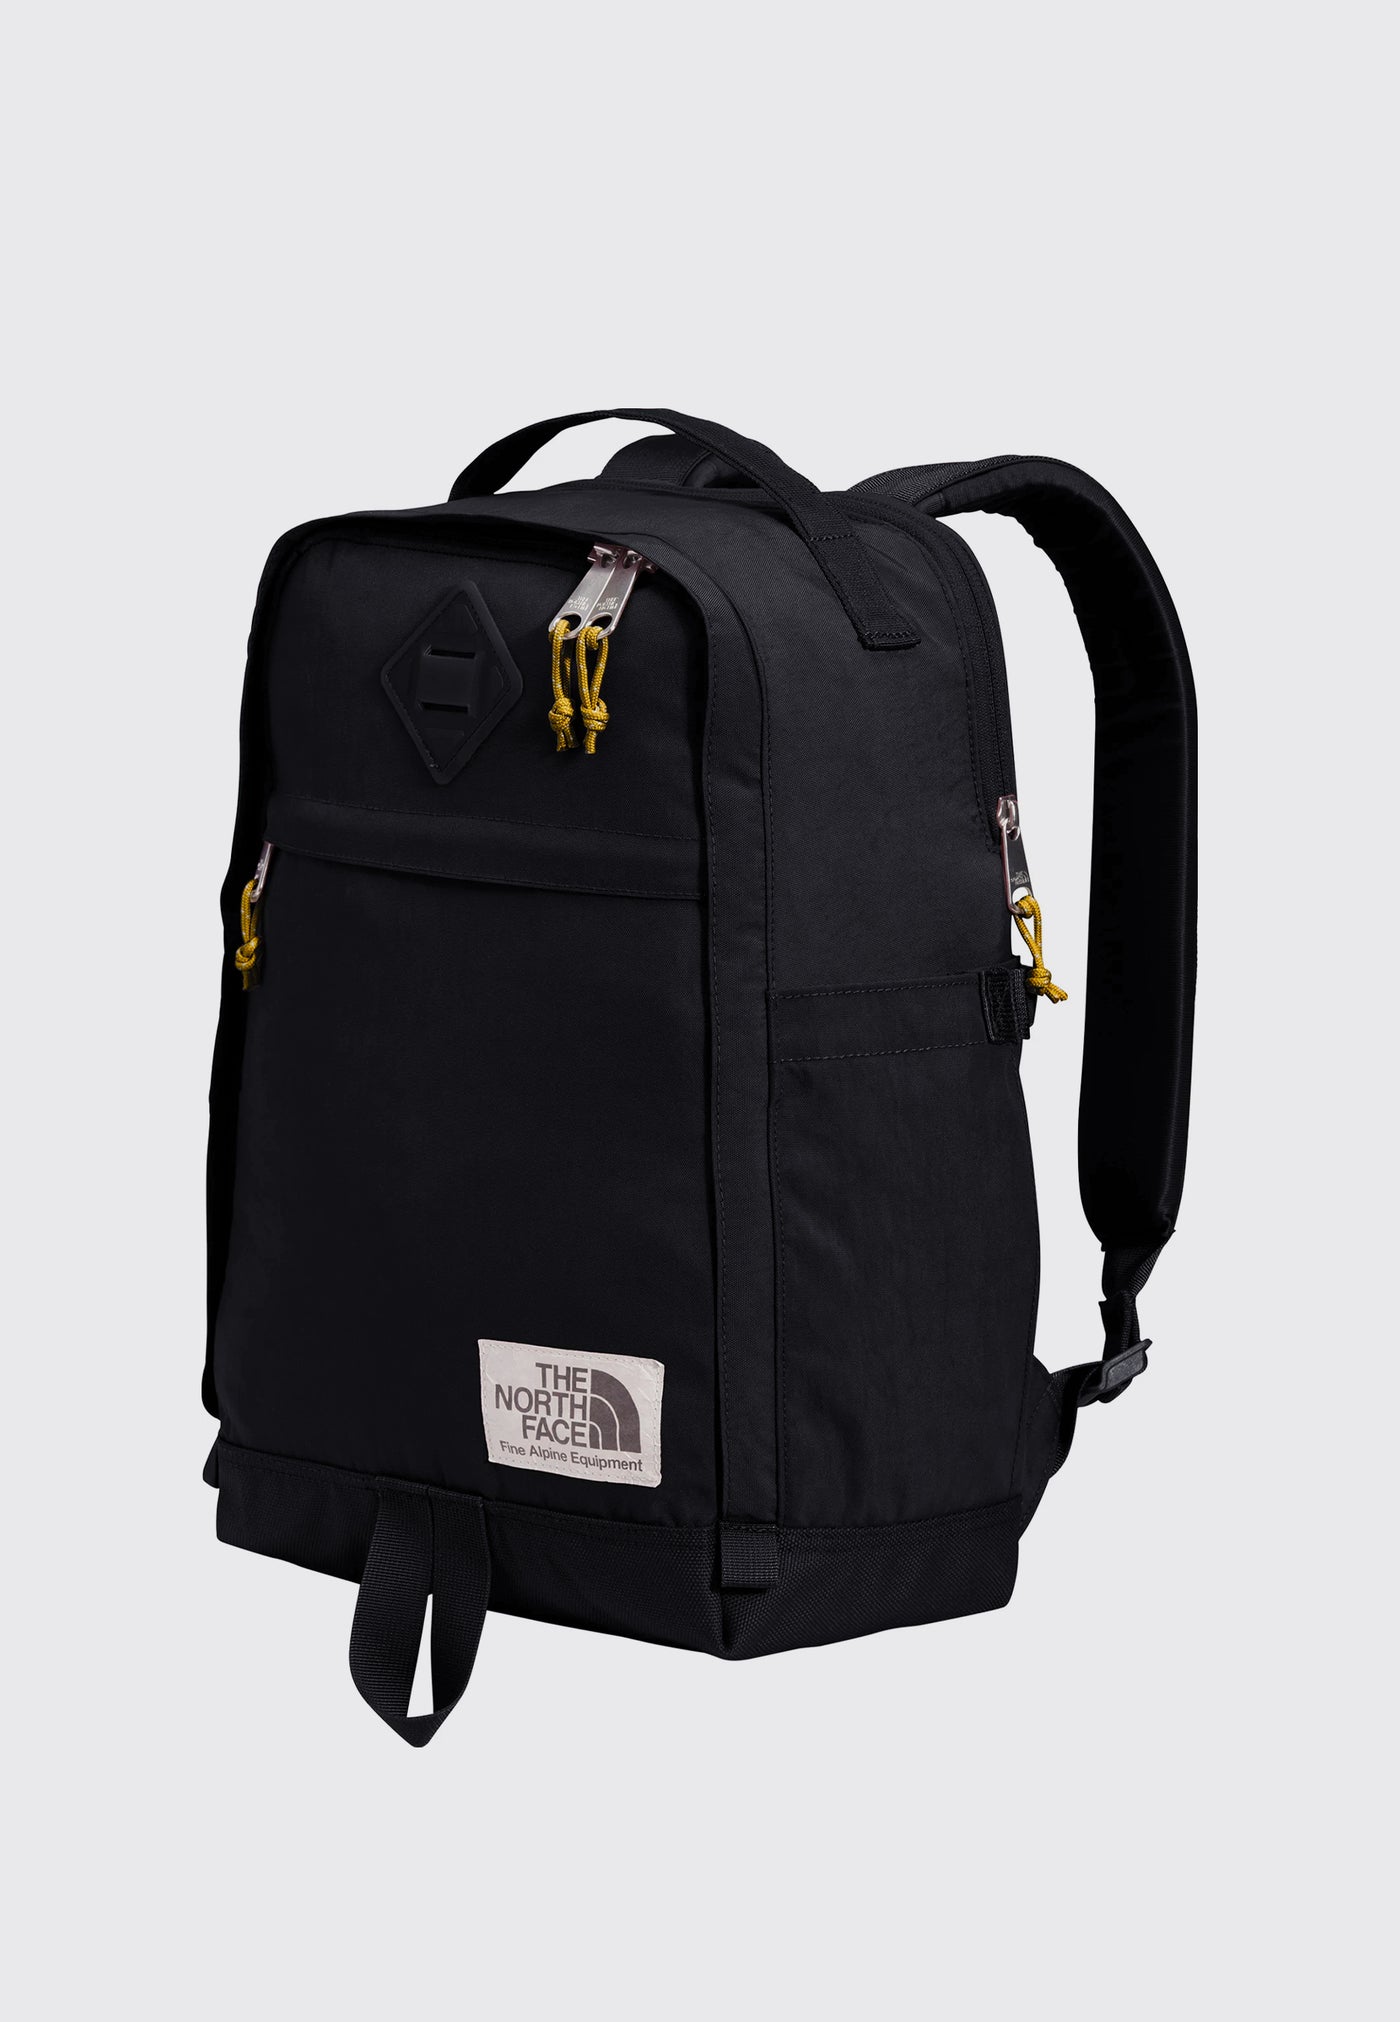 The North Face | Buy Berkeley Daypack - Black/Mineral Gold online